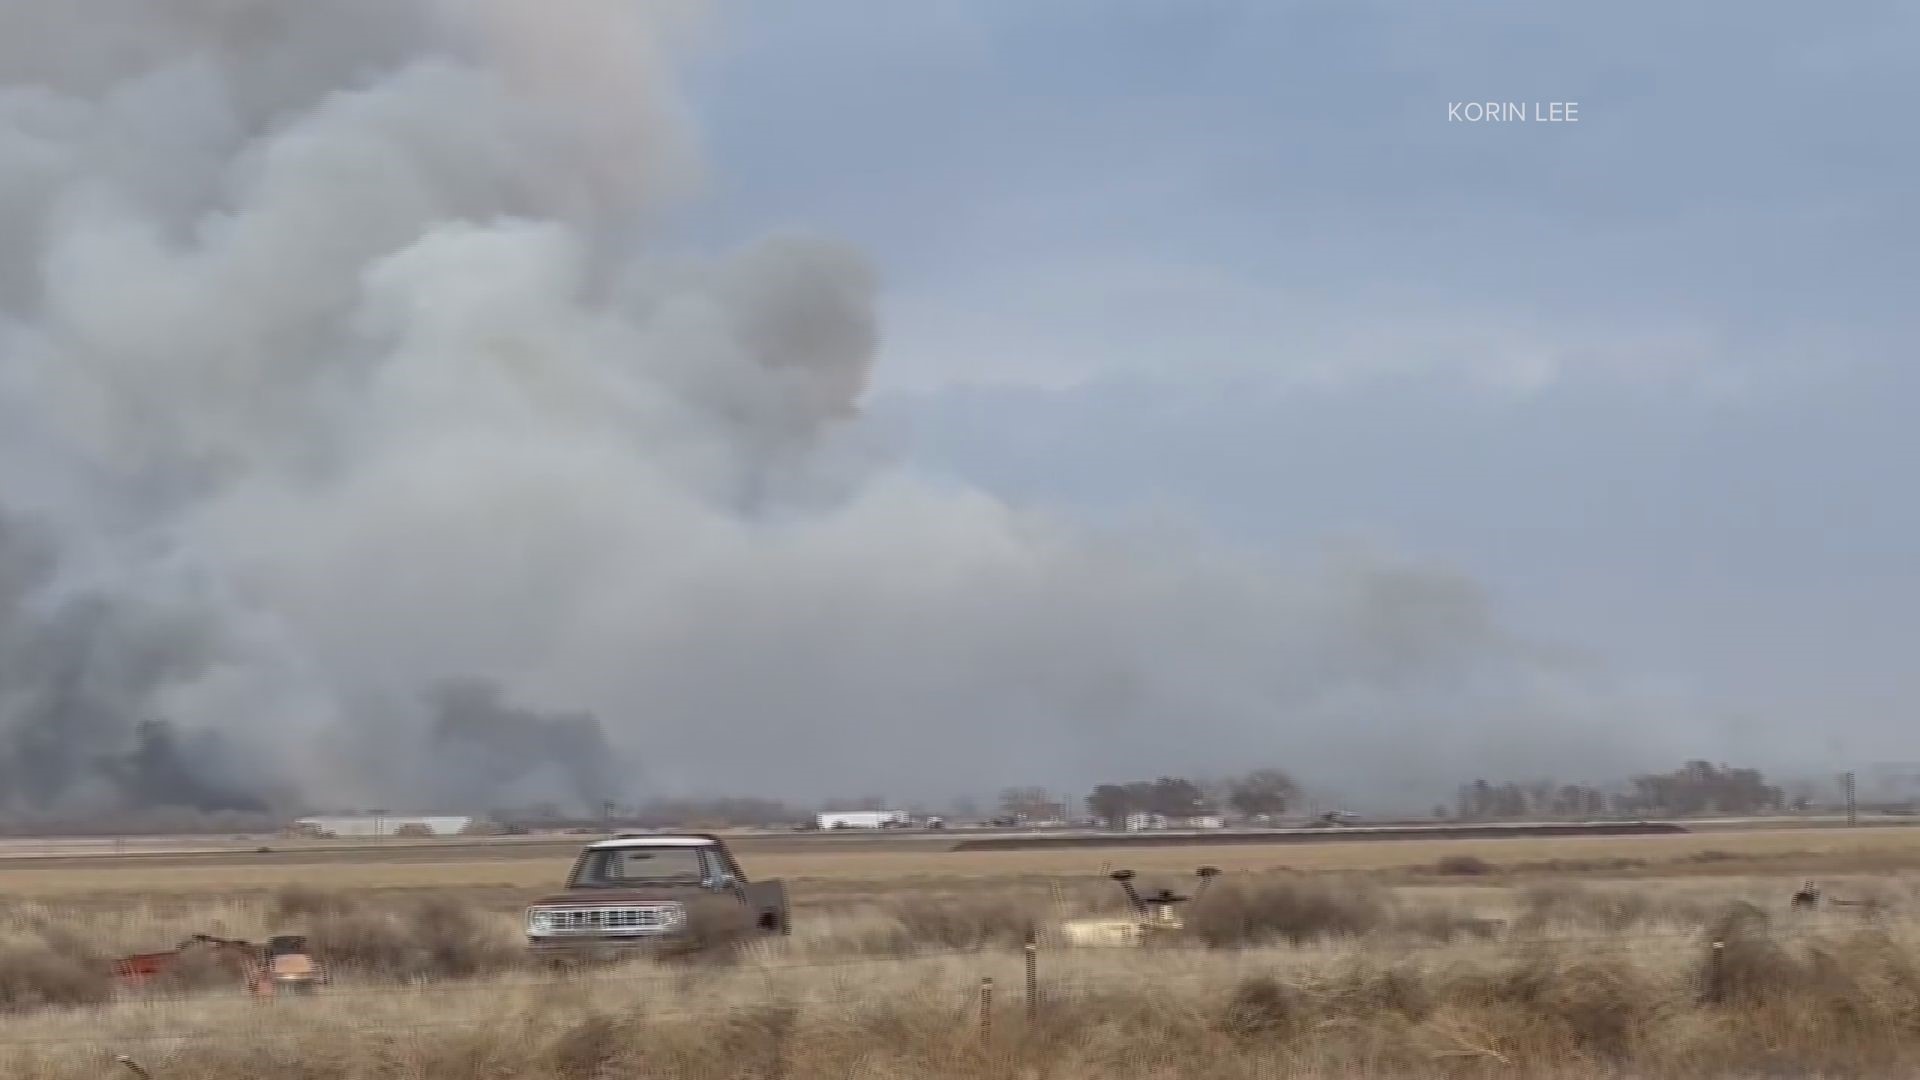 A grass fire started just east of Lamar on Wednesday afternoon, and a large plume of smoke could be seen from central Lamar and across Prowers County.